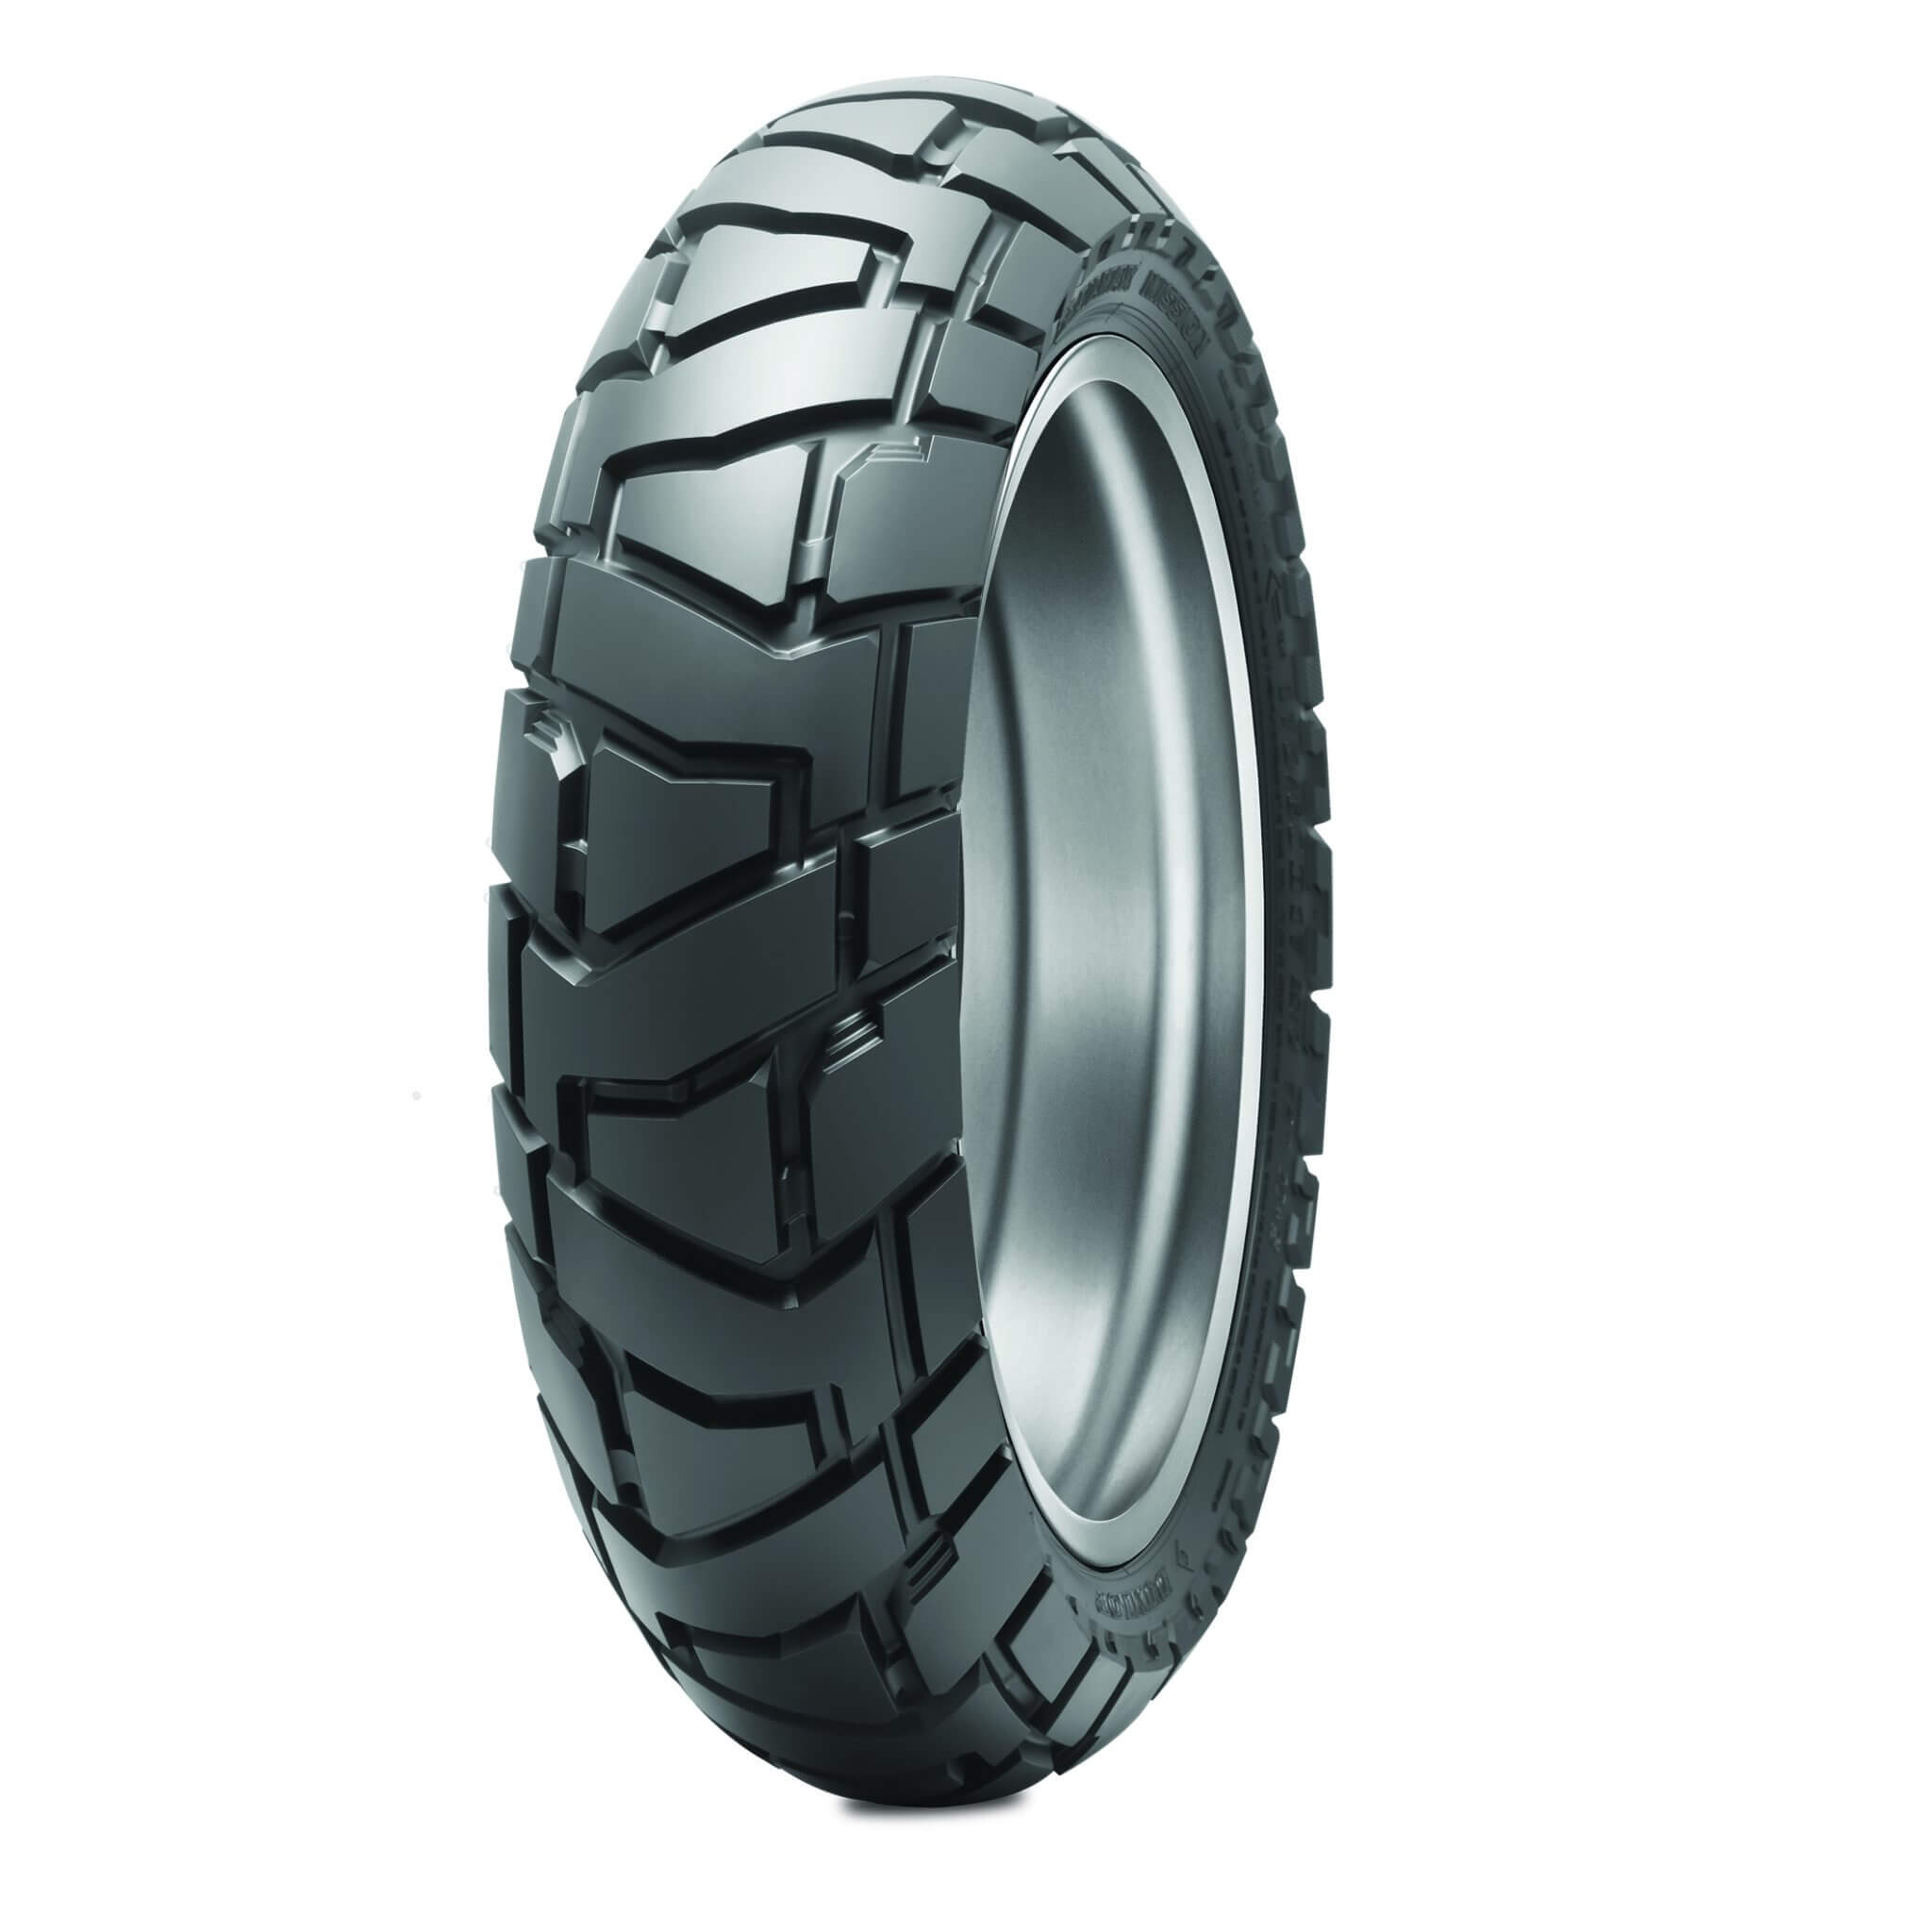 gman-approved-dunlop-motorcycle-tire-tested-best-in-handling